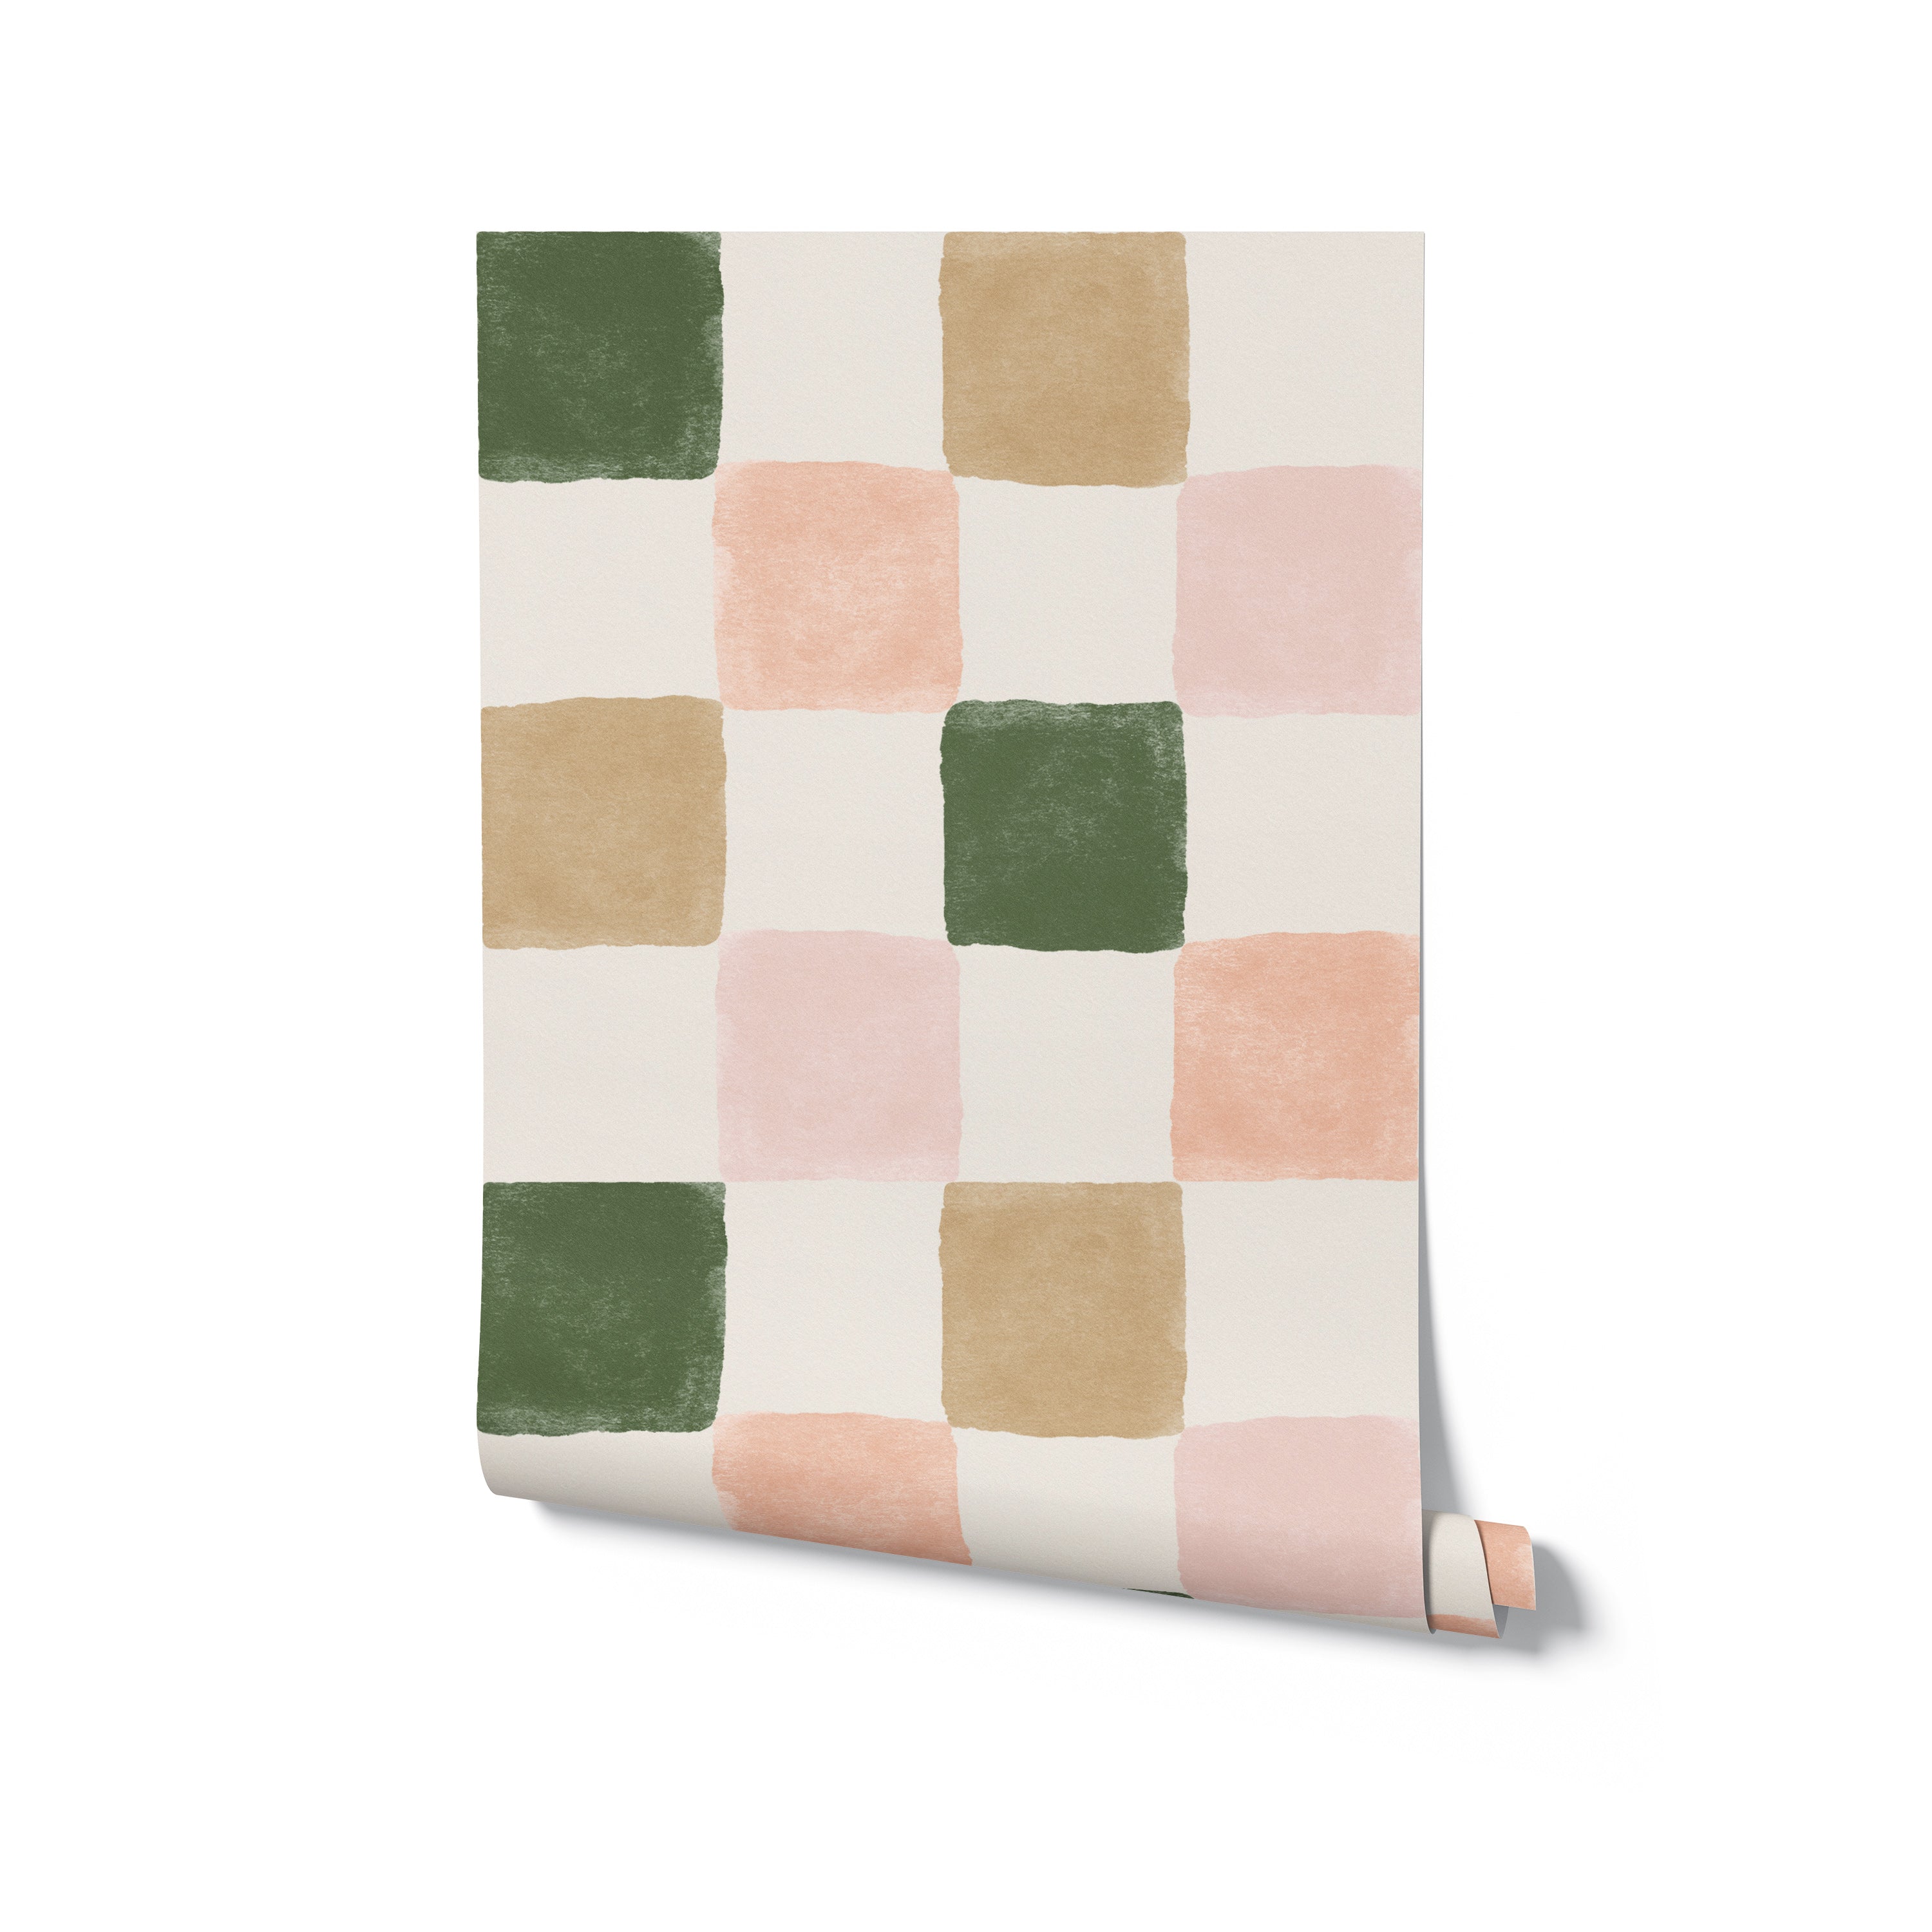 A single roll of Clémence Wallpaper II unrolled to display its charming checkered pattern with textured squares in pink, green, and beige hues on a light background.